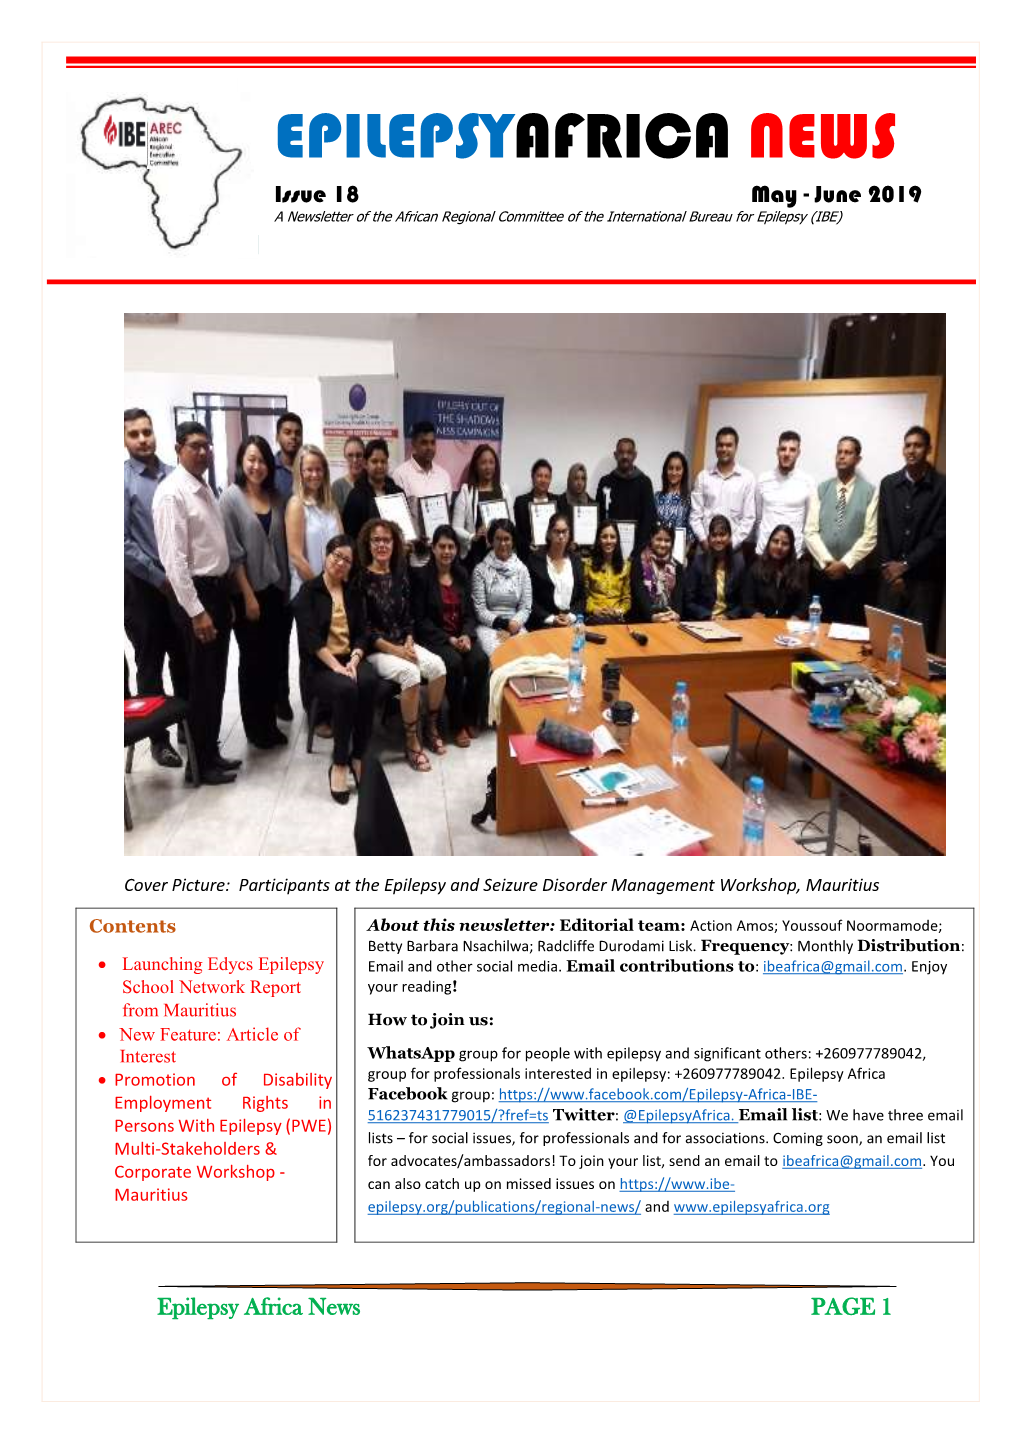 EPILEPSYAFRICA NEWS Issue 18 May - June 2019 a Newsletter of the African Regional Committee of the International Bureau for Epilepsy (IBE)